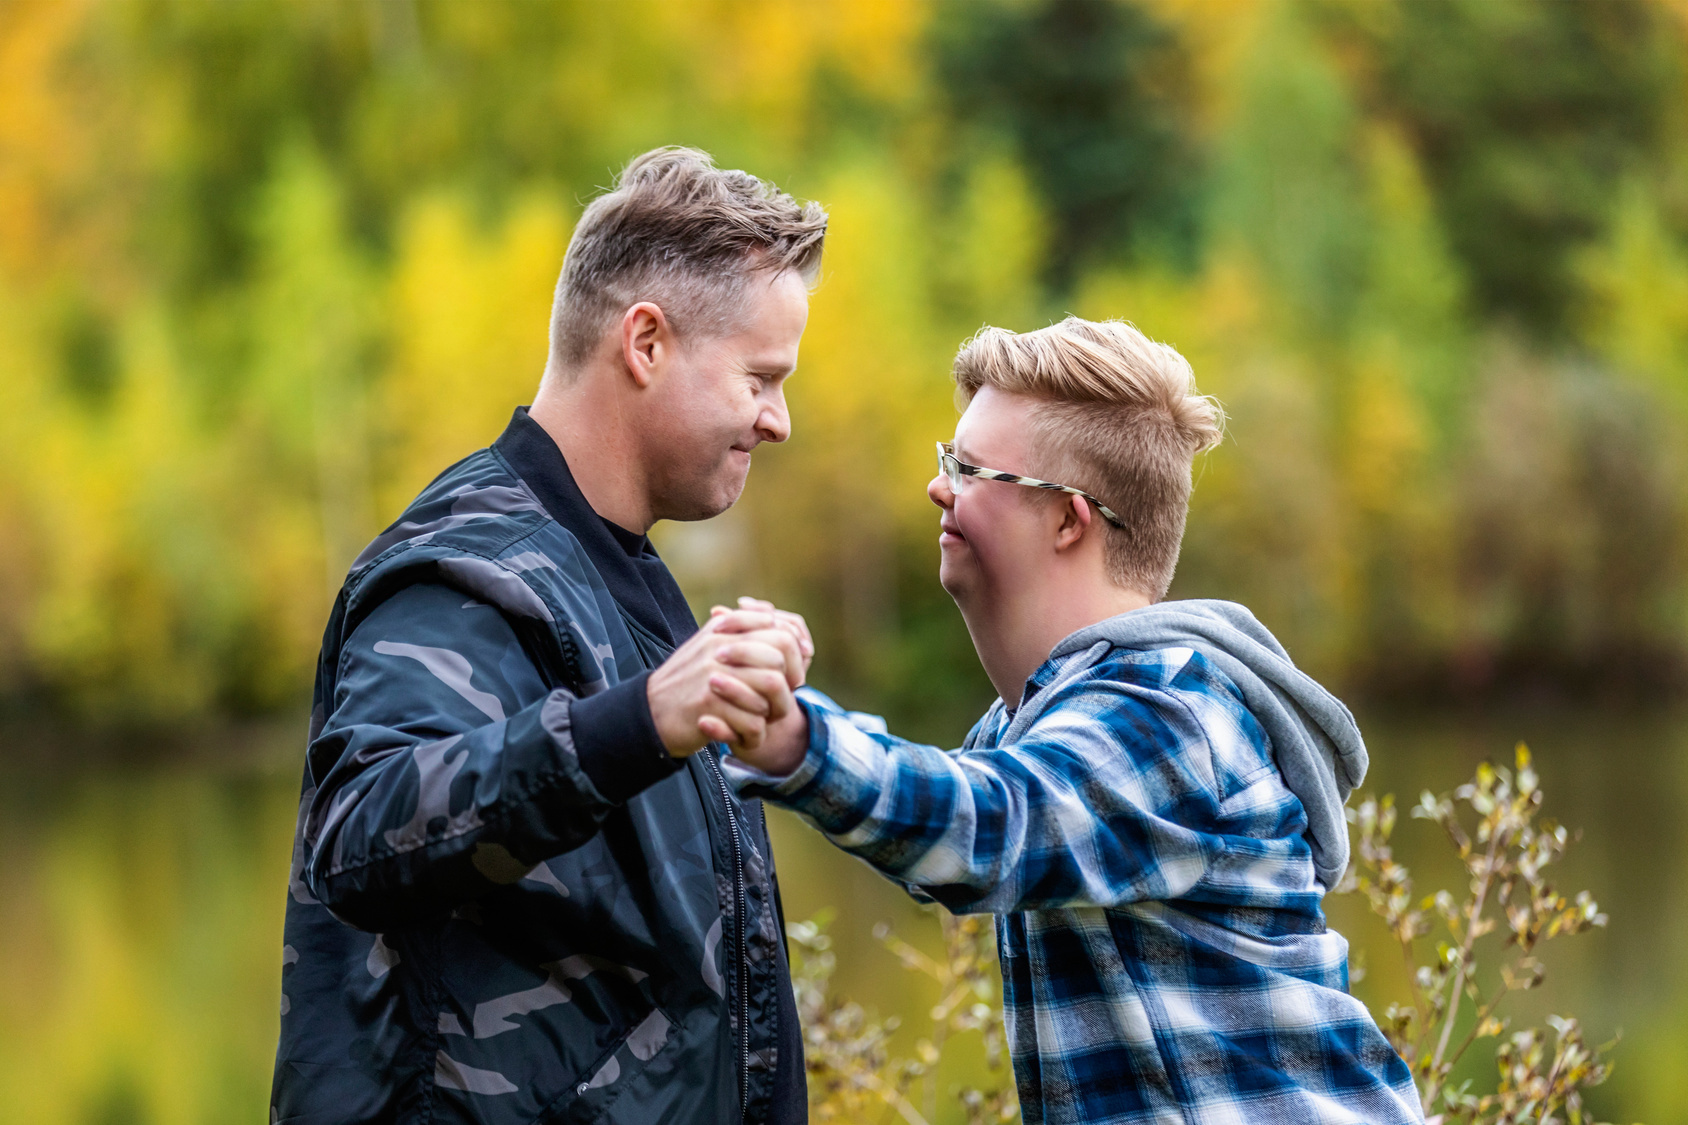 A young man with Down Syndrome and his father enjoying each other's company